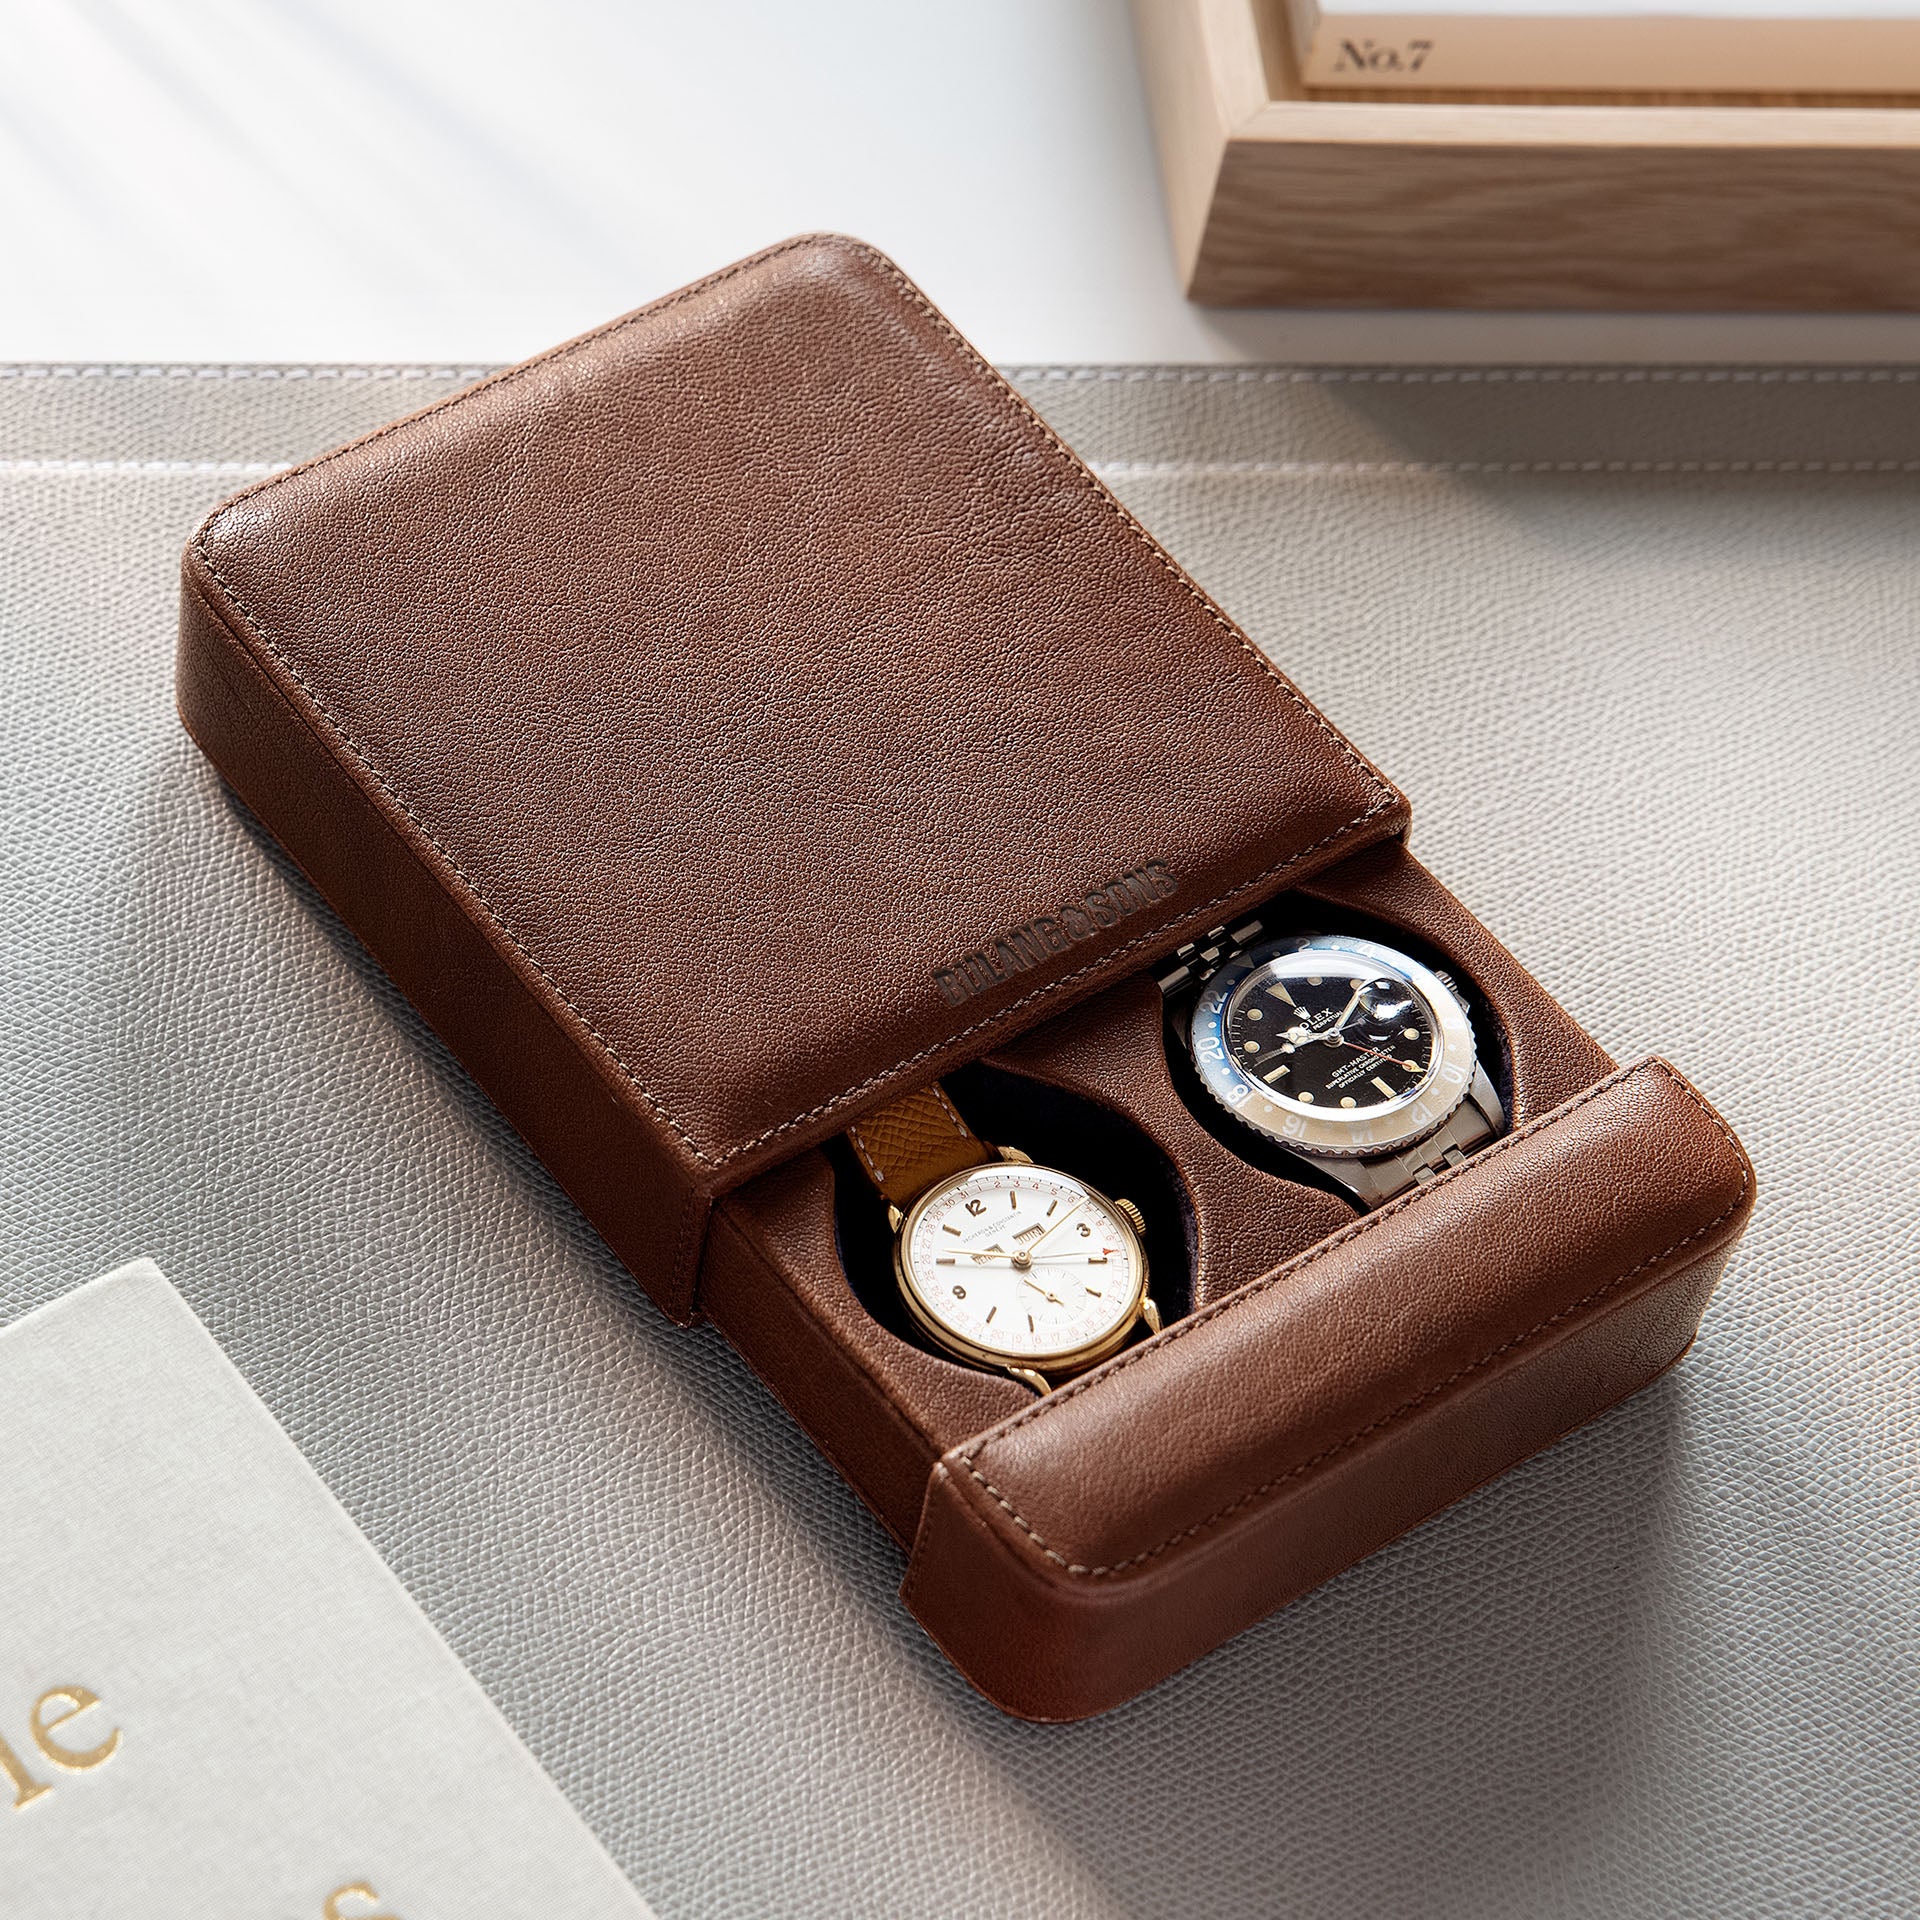 Wholesale Ready To Ship Factory Recycled Leather Watch Packaging Box Luxury  Watch Boxes Case and Waterproof Leather Travel watch roll case From  m.